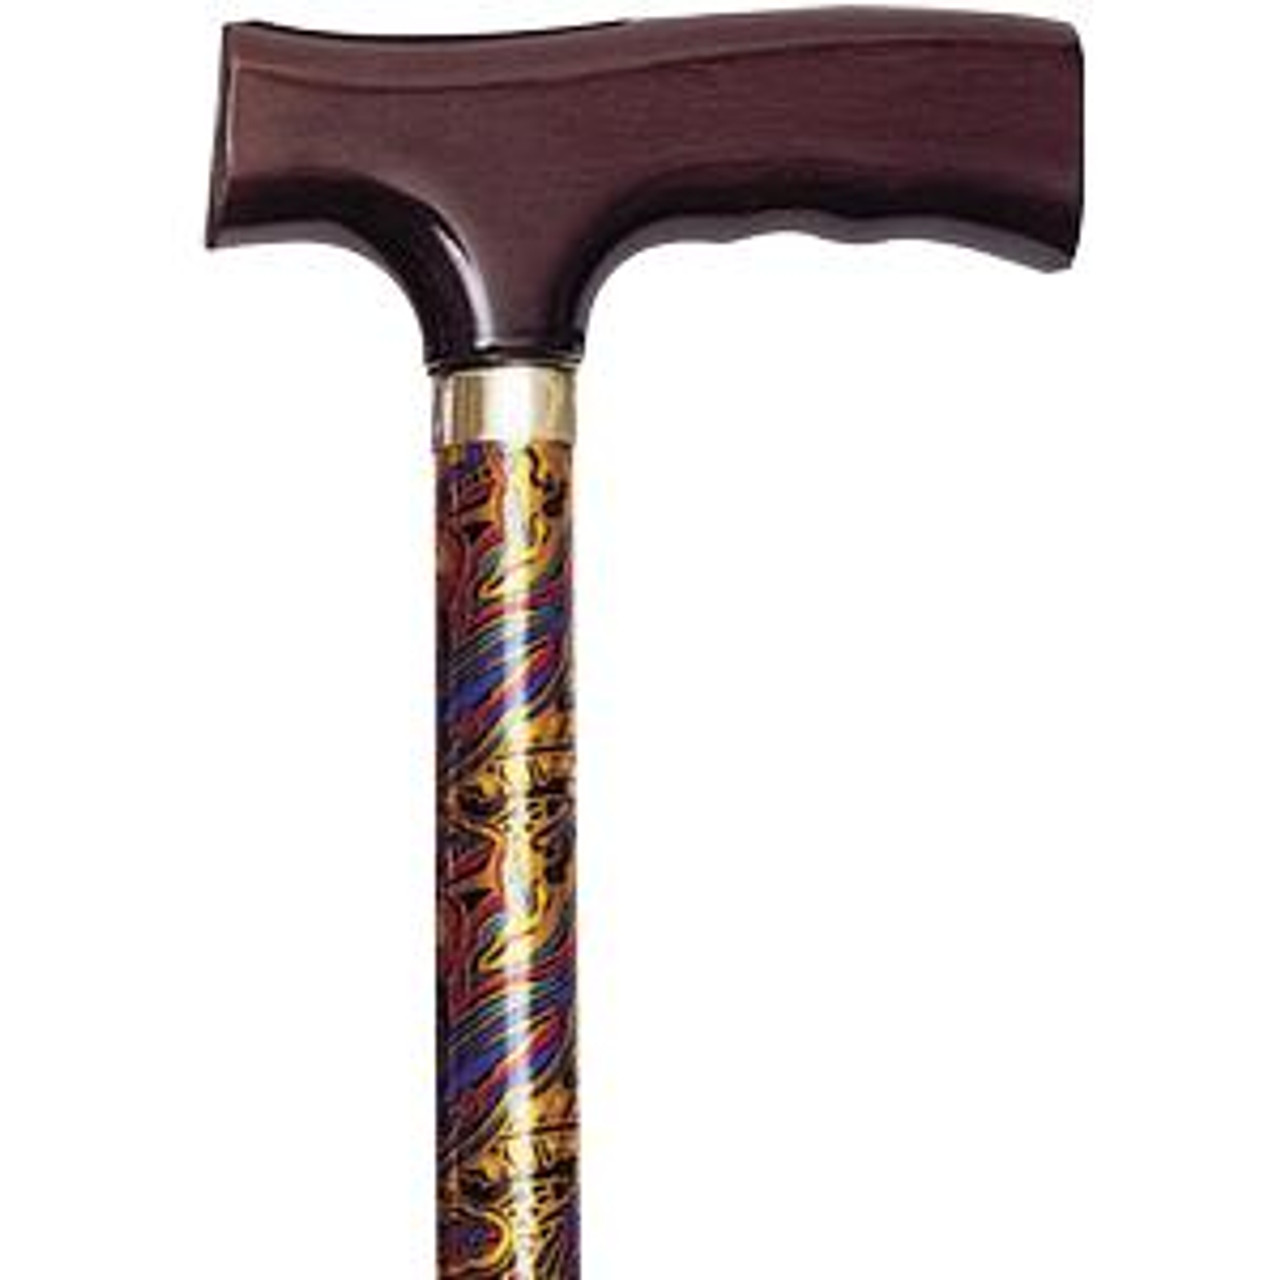 Alex 10510 - Folding Travel Cane with Fritz Handle, Butterfly - Medical Mega